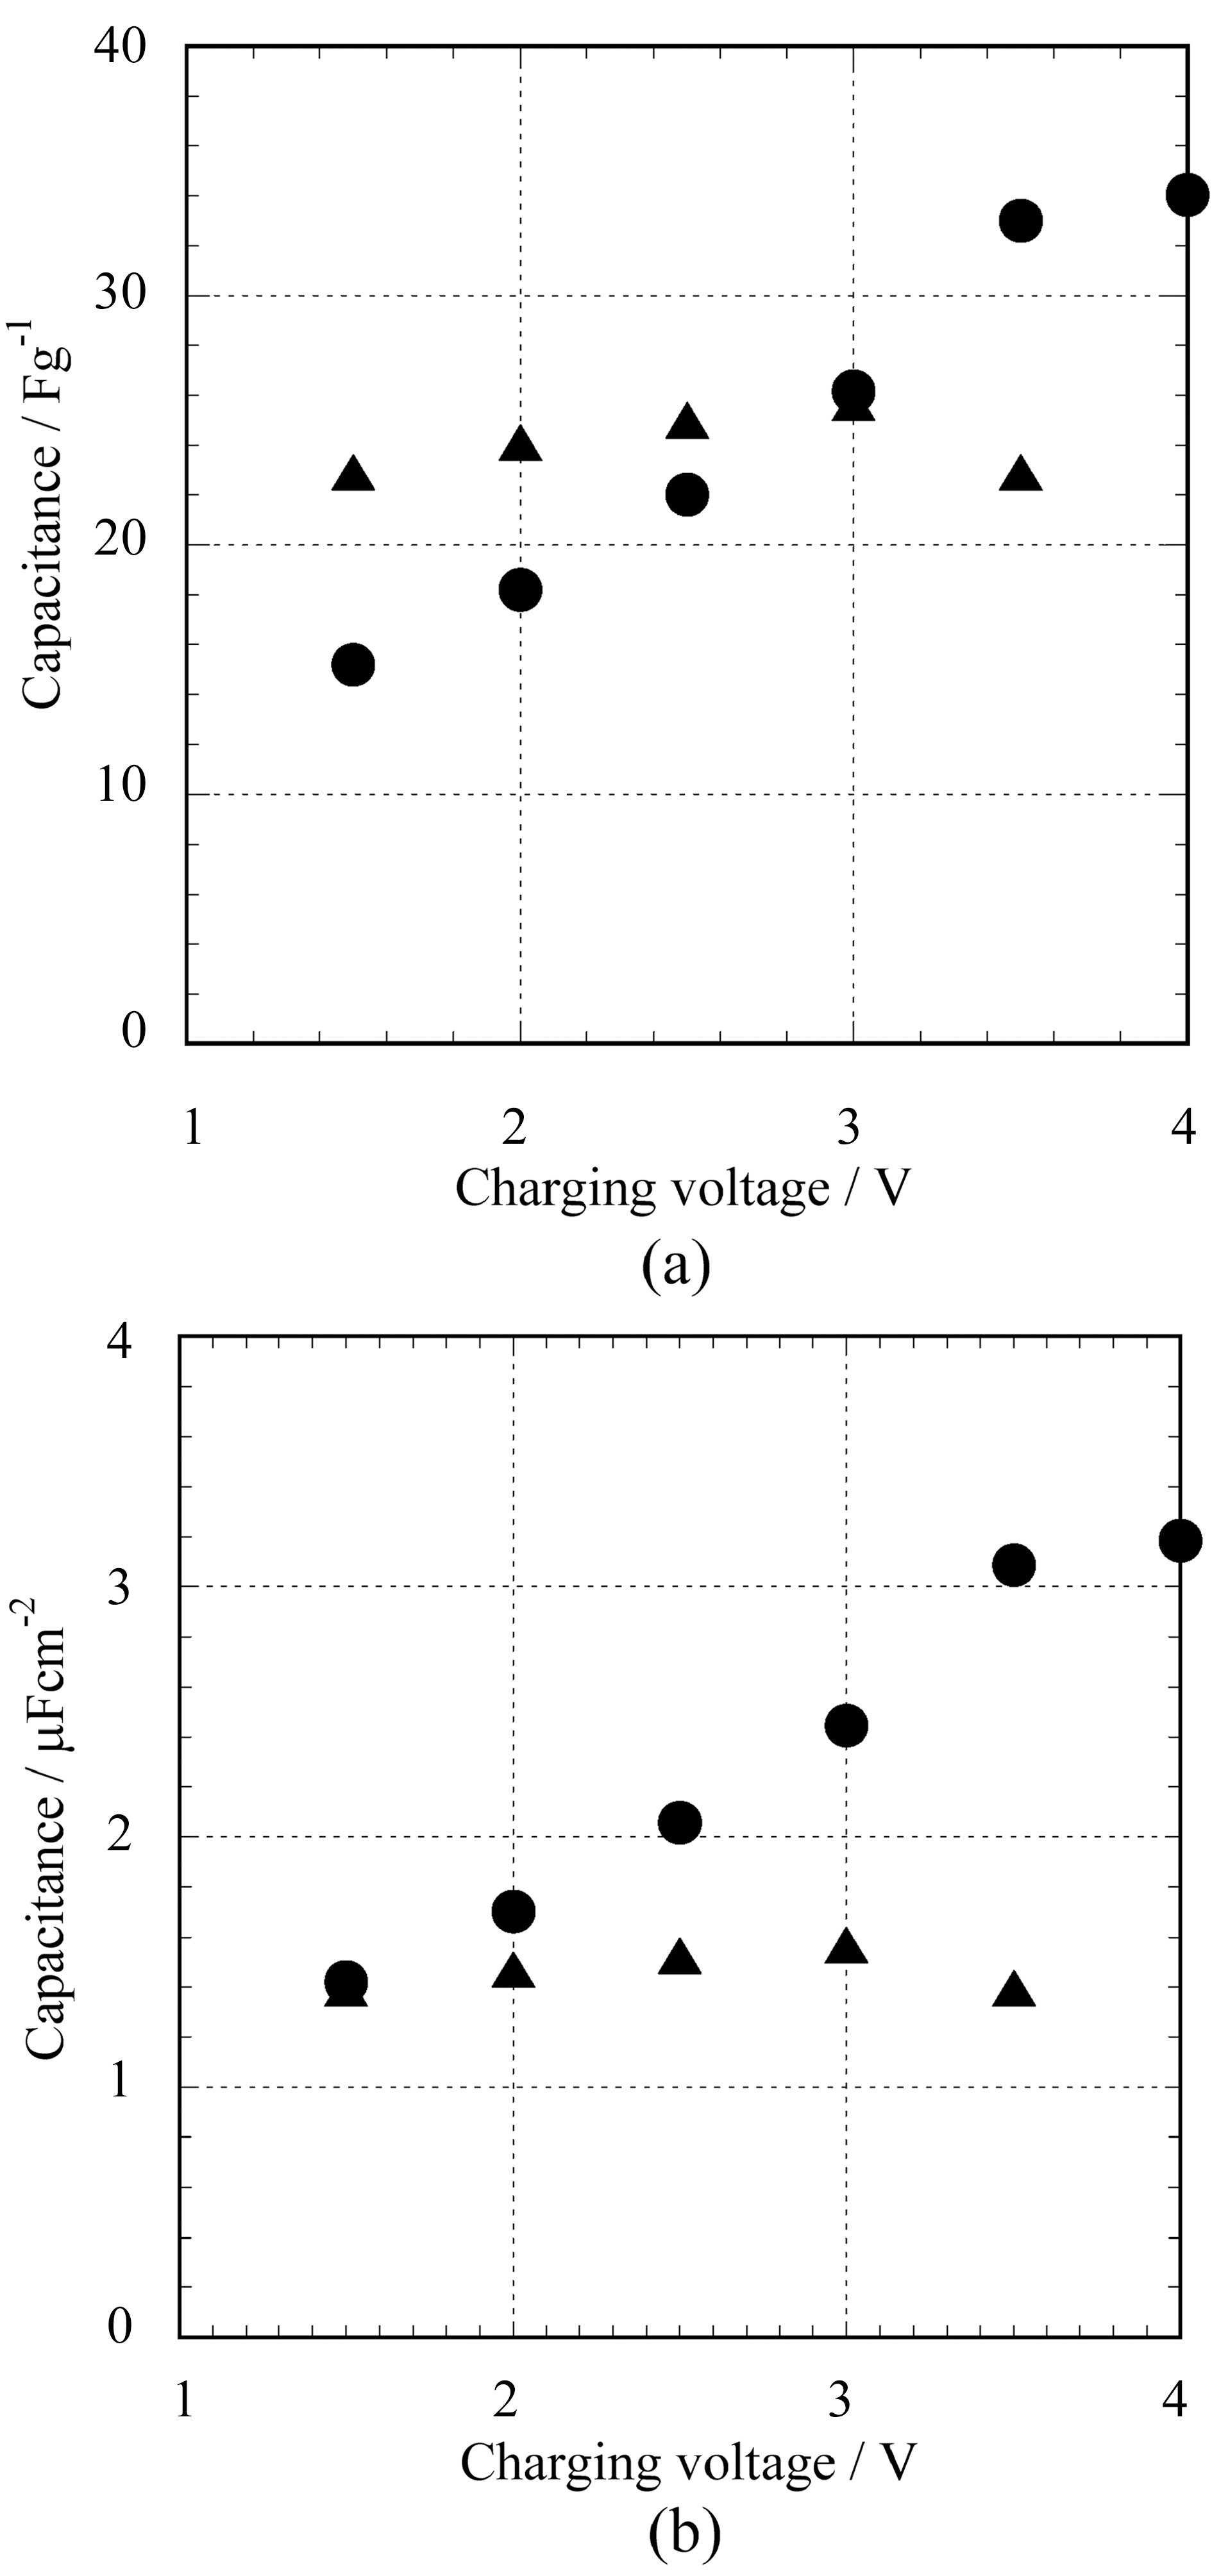 Charging-voltage dependence of specific capacitance (a) per weight and (b) surface area of electrode materials; ● SG-SWNT ▲ YP17.